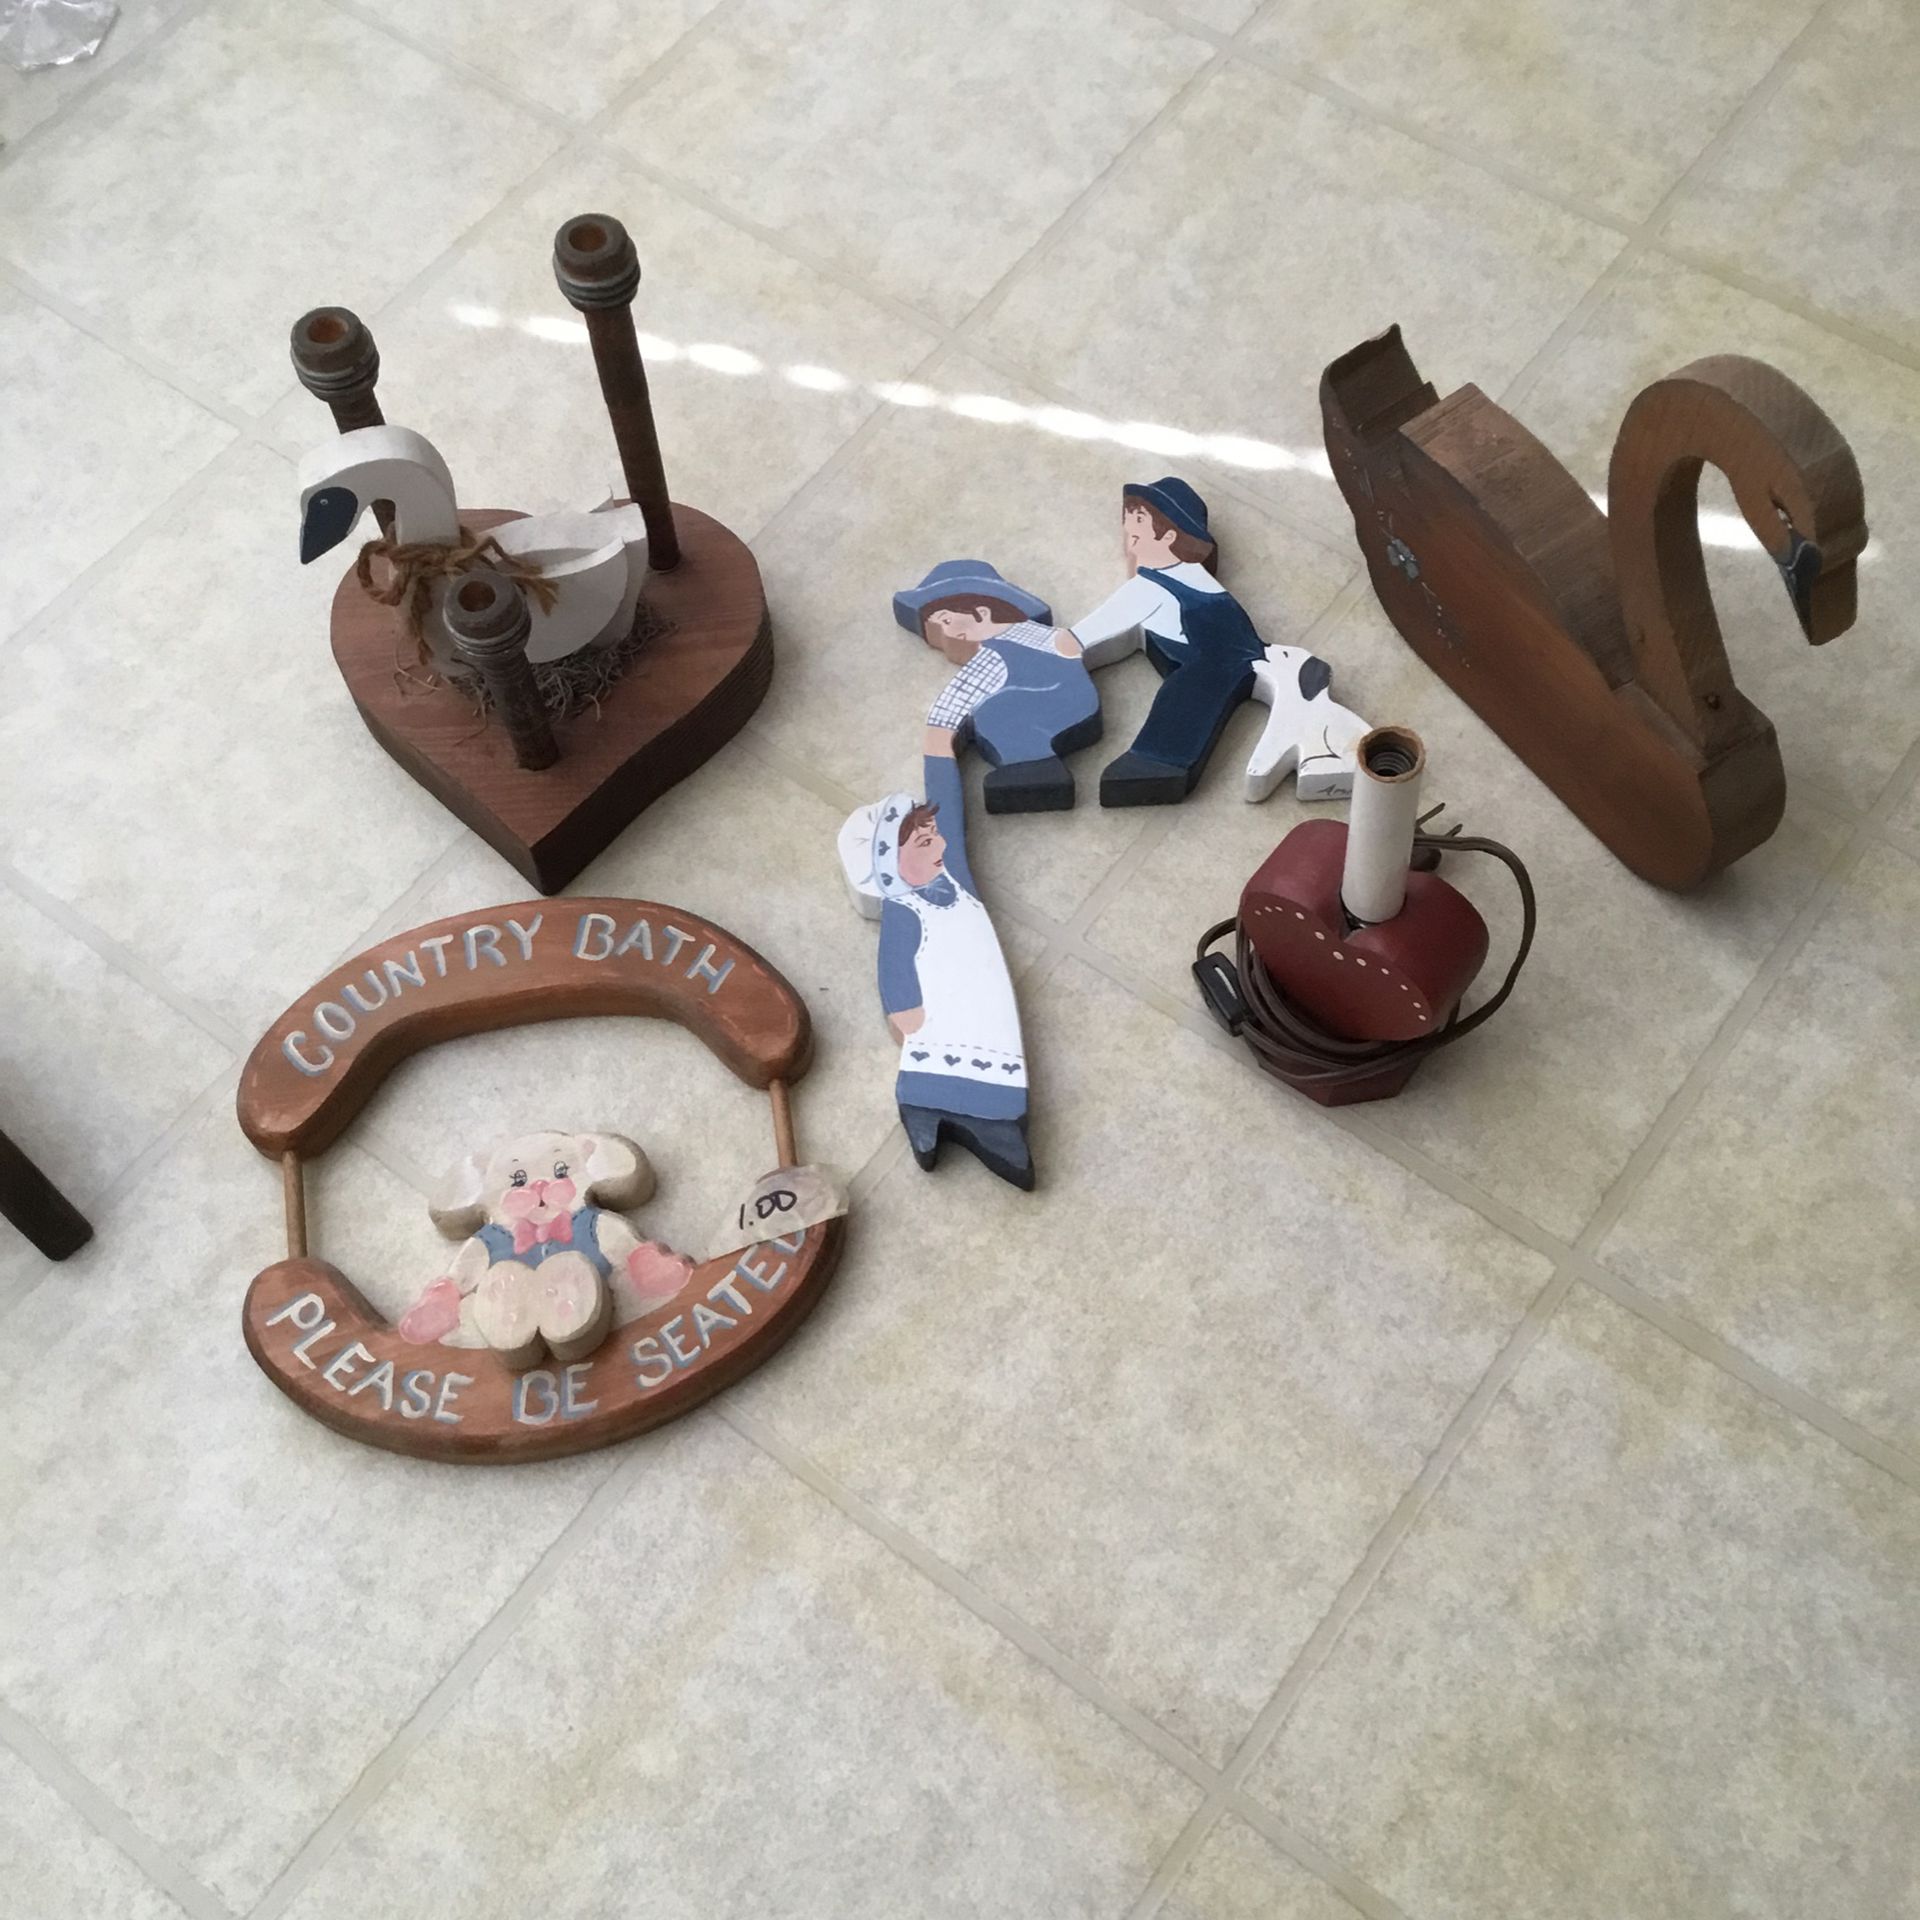 Wooden Country Items(5) All 5 For 5.00